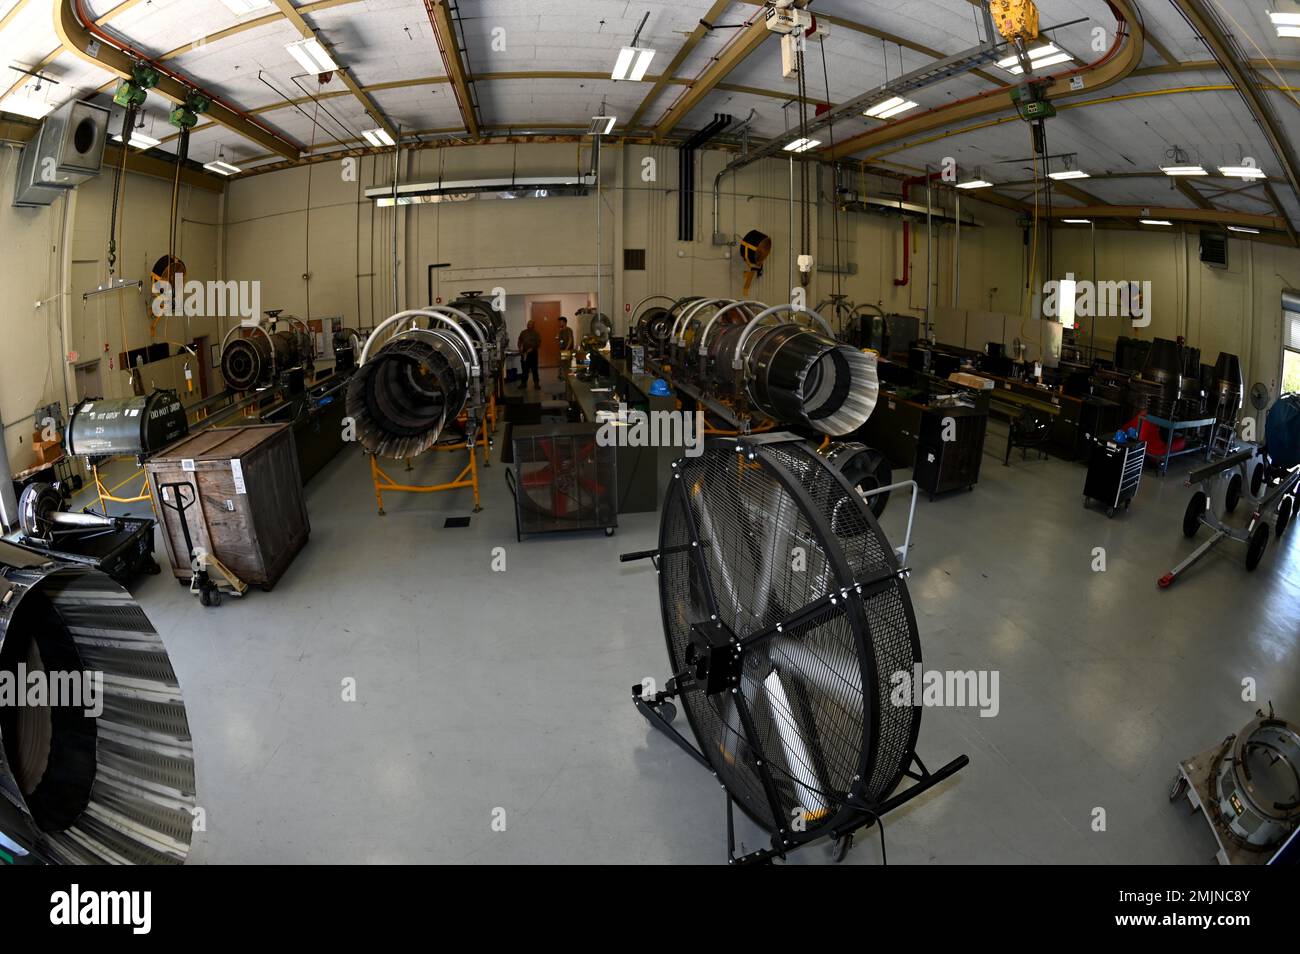 U.S. Air Force 169th Maintenance Squadron engine shop maintenance bay preps F-16 engines in need of repair at McEntire Joint National Guard Base, South Carolina, August 31, 2022. Stock Photo